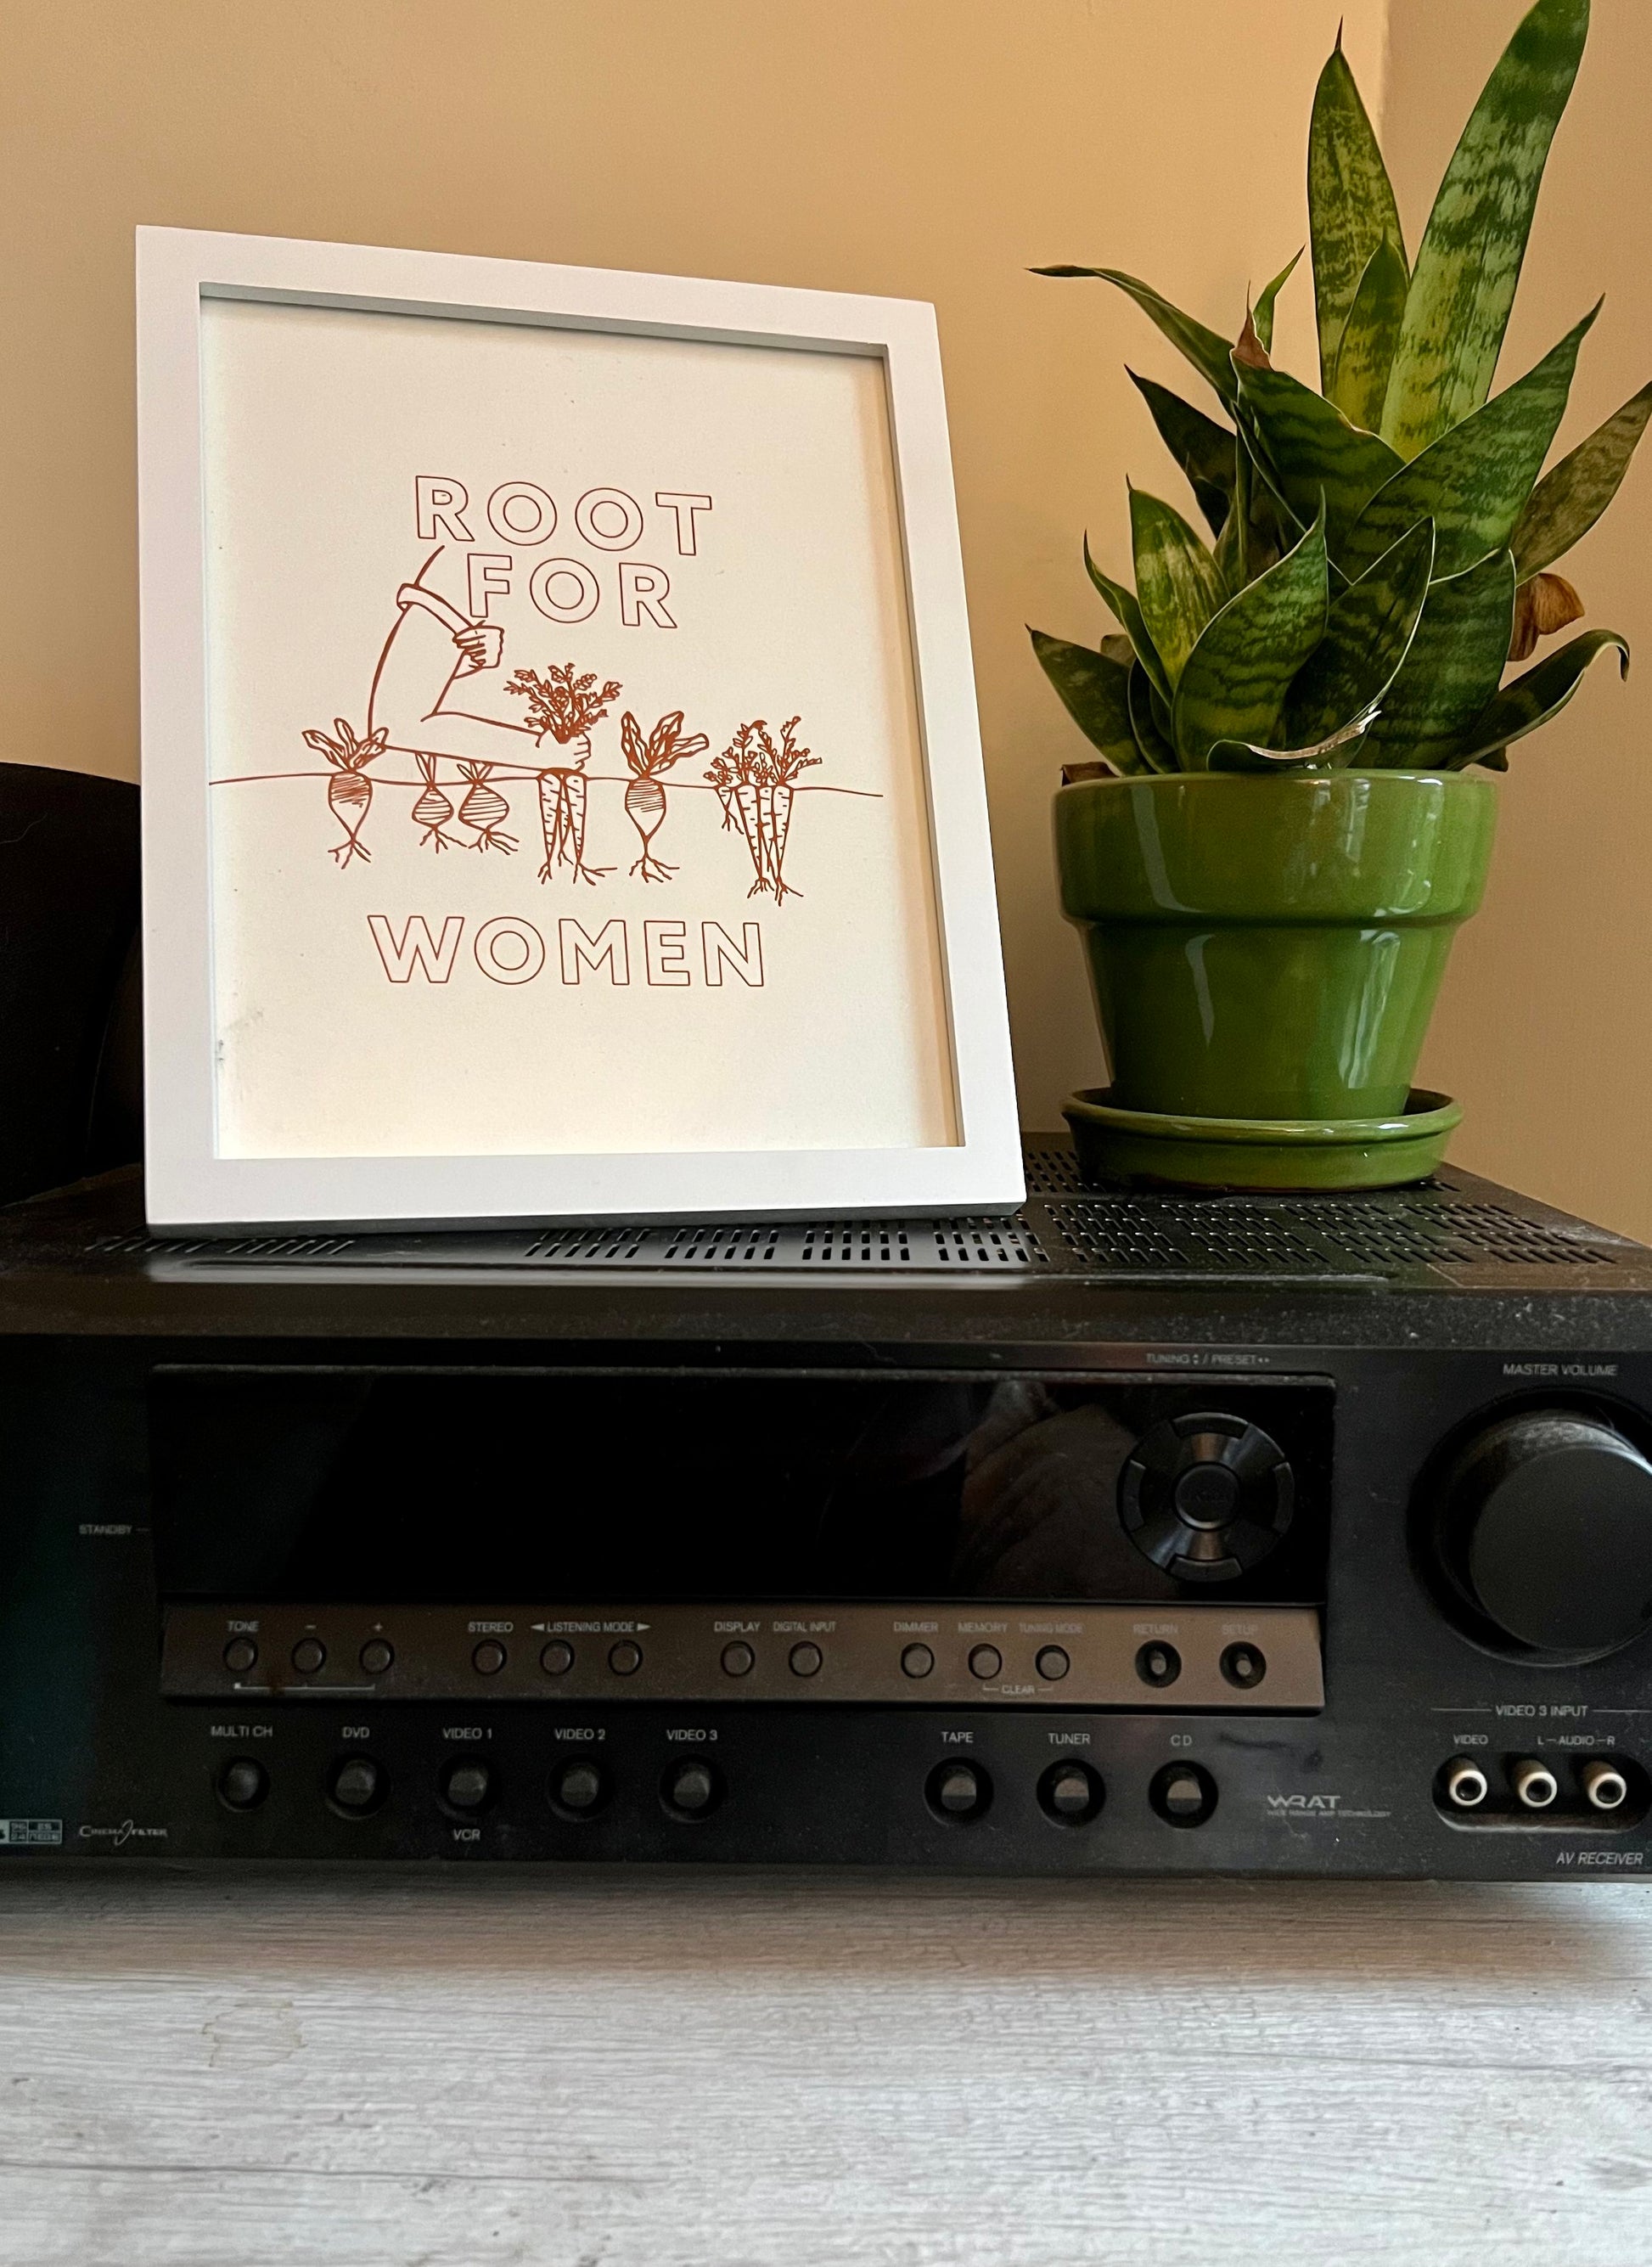 A framed "Root for women" print on a stereo next to a potted plant